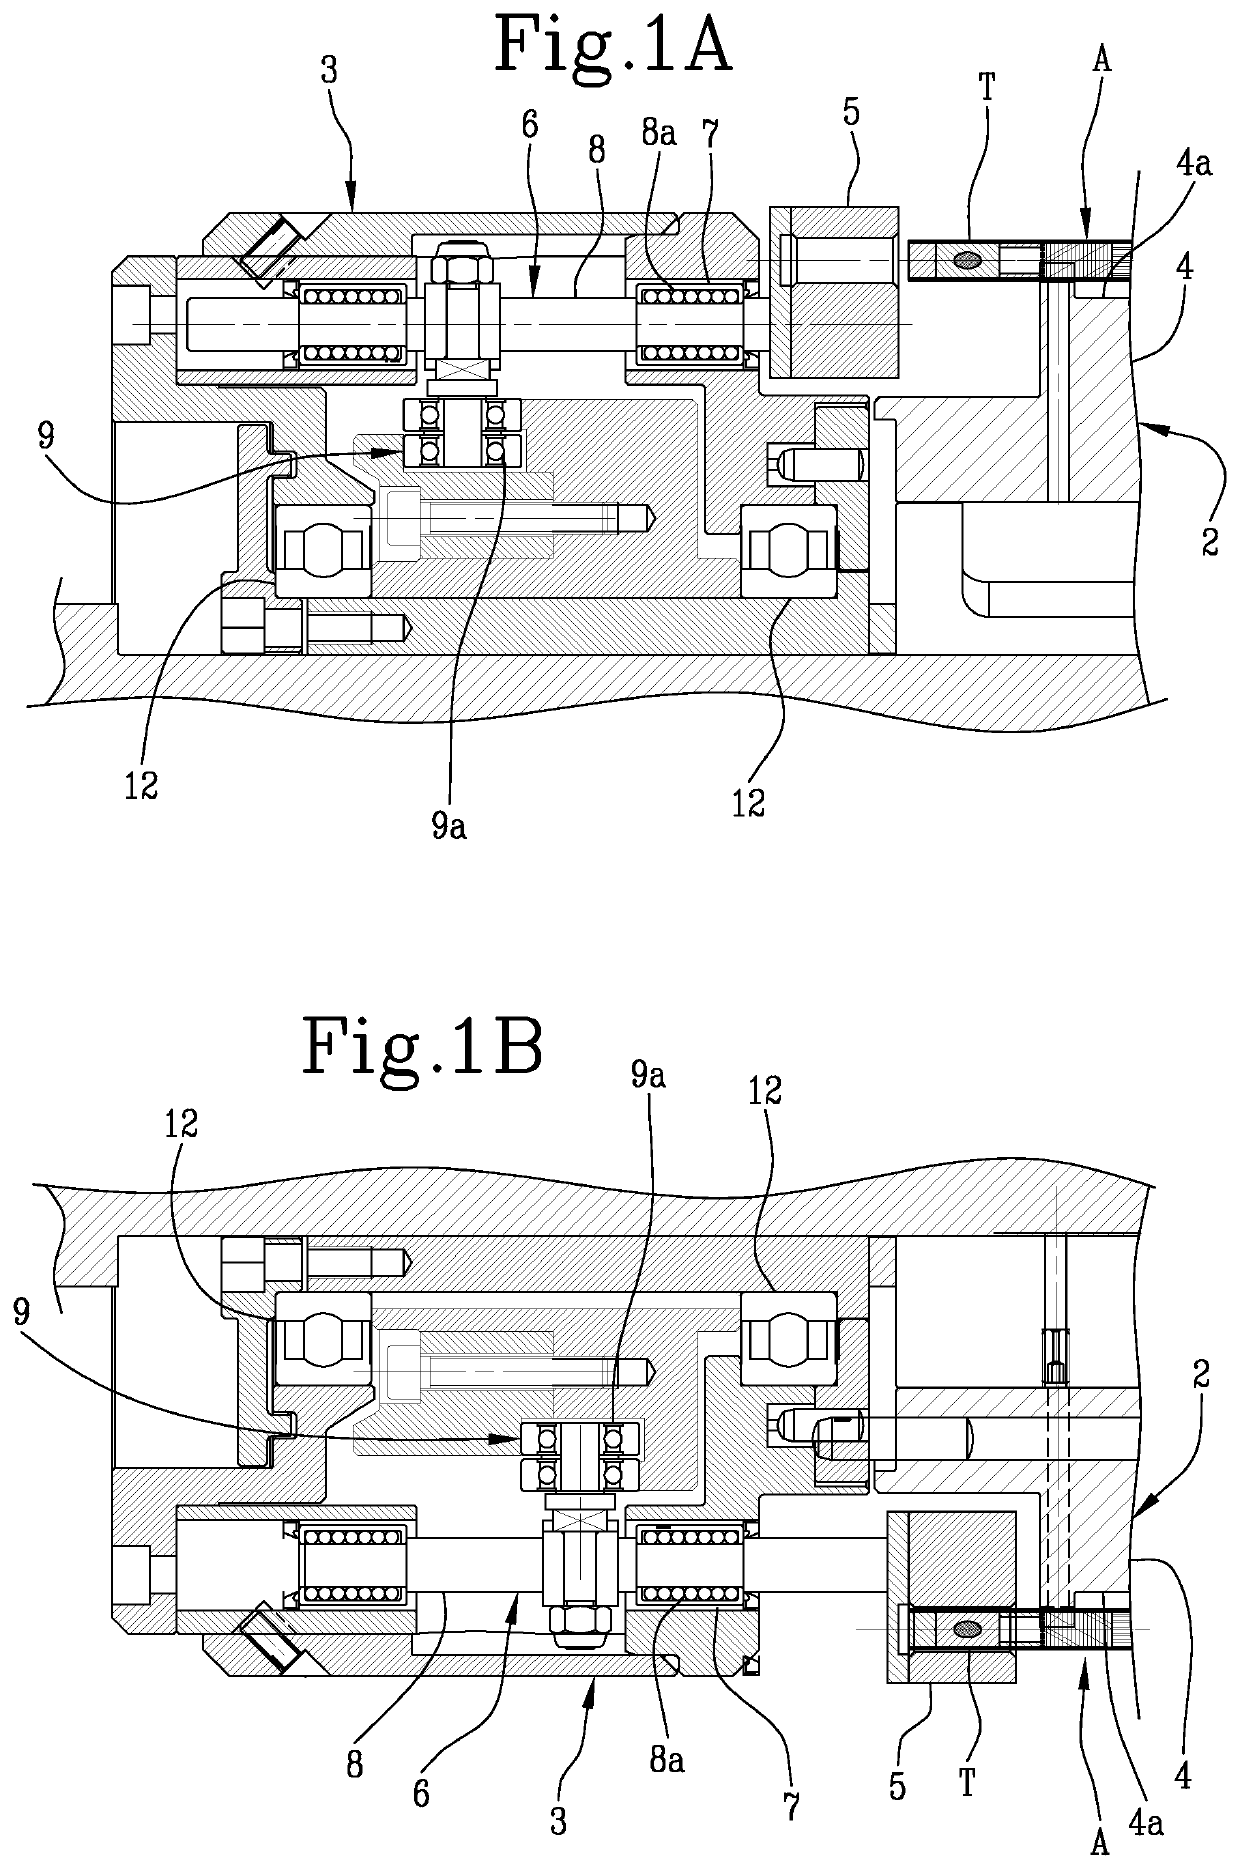 Device for inspecting smoking articles